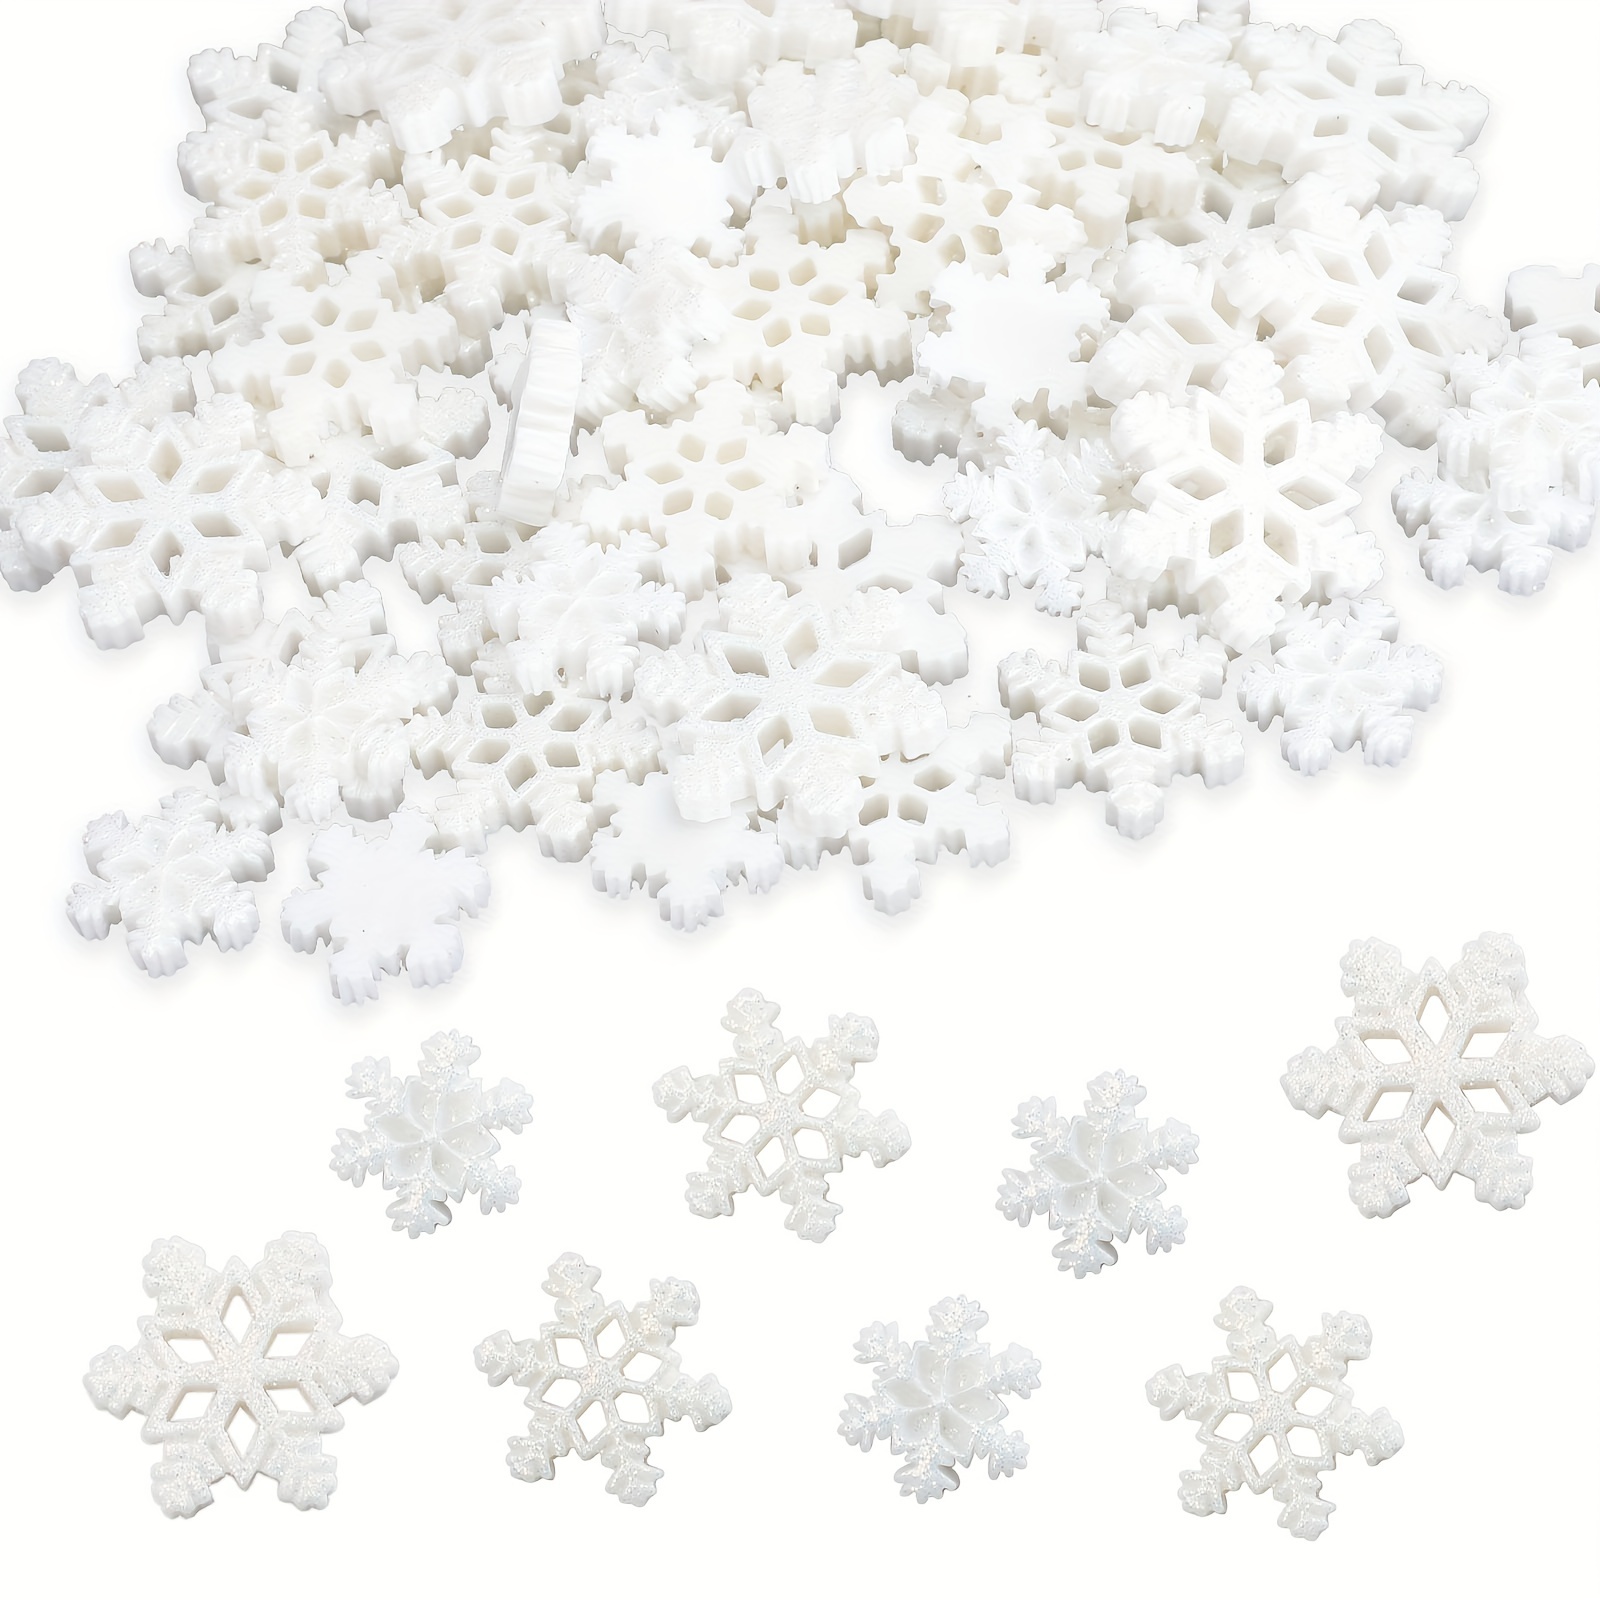 Snowflake Stickers Winter Crafts Winter Party Decorations - Bulk 12 Pack  Winter Stickers Snowflake Scrapbook Stickers (Snowflake Craft Supplies for